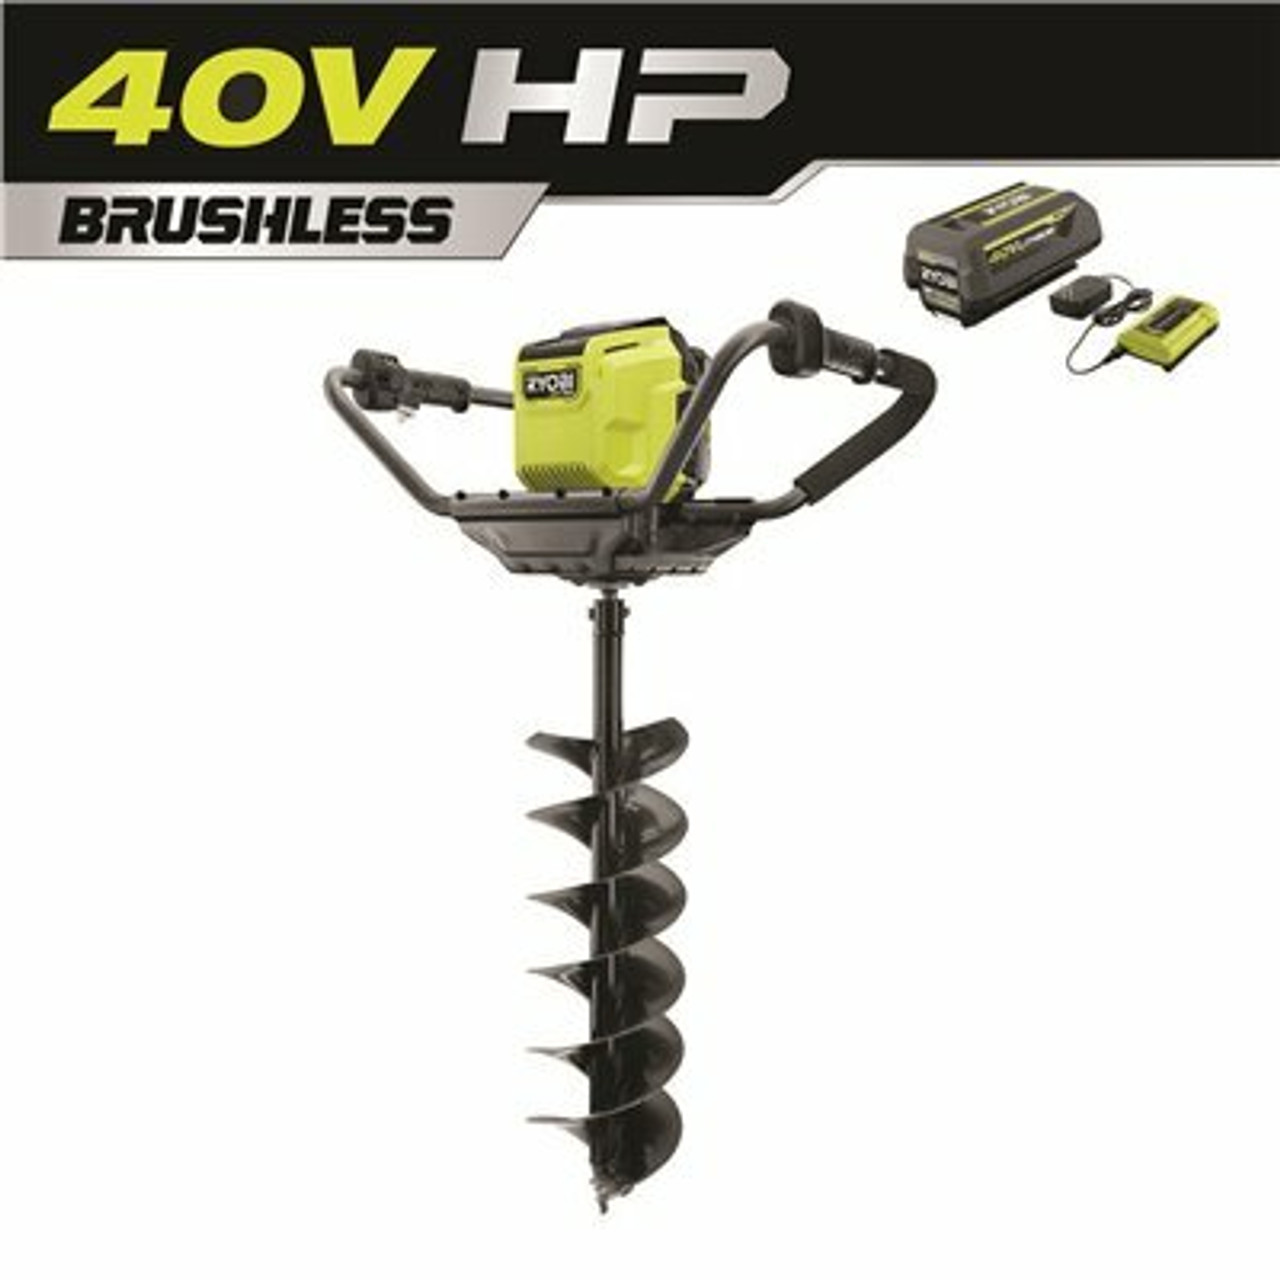 Ryobi 40V Hp Brushless Cordless Earth Auger With 8 In. Bit With 4.0 Ah Battery And Charger